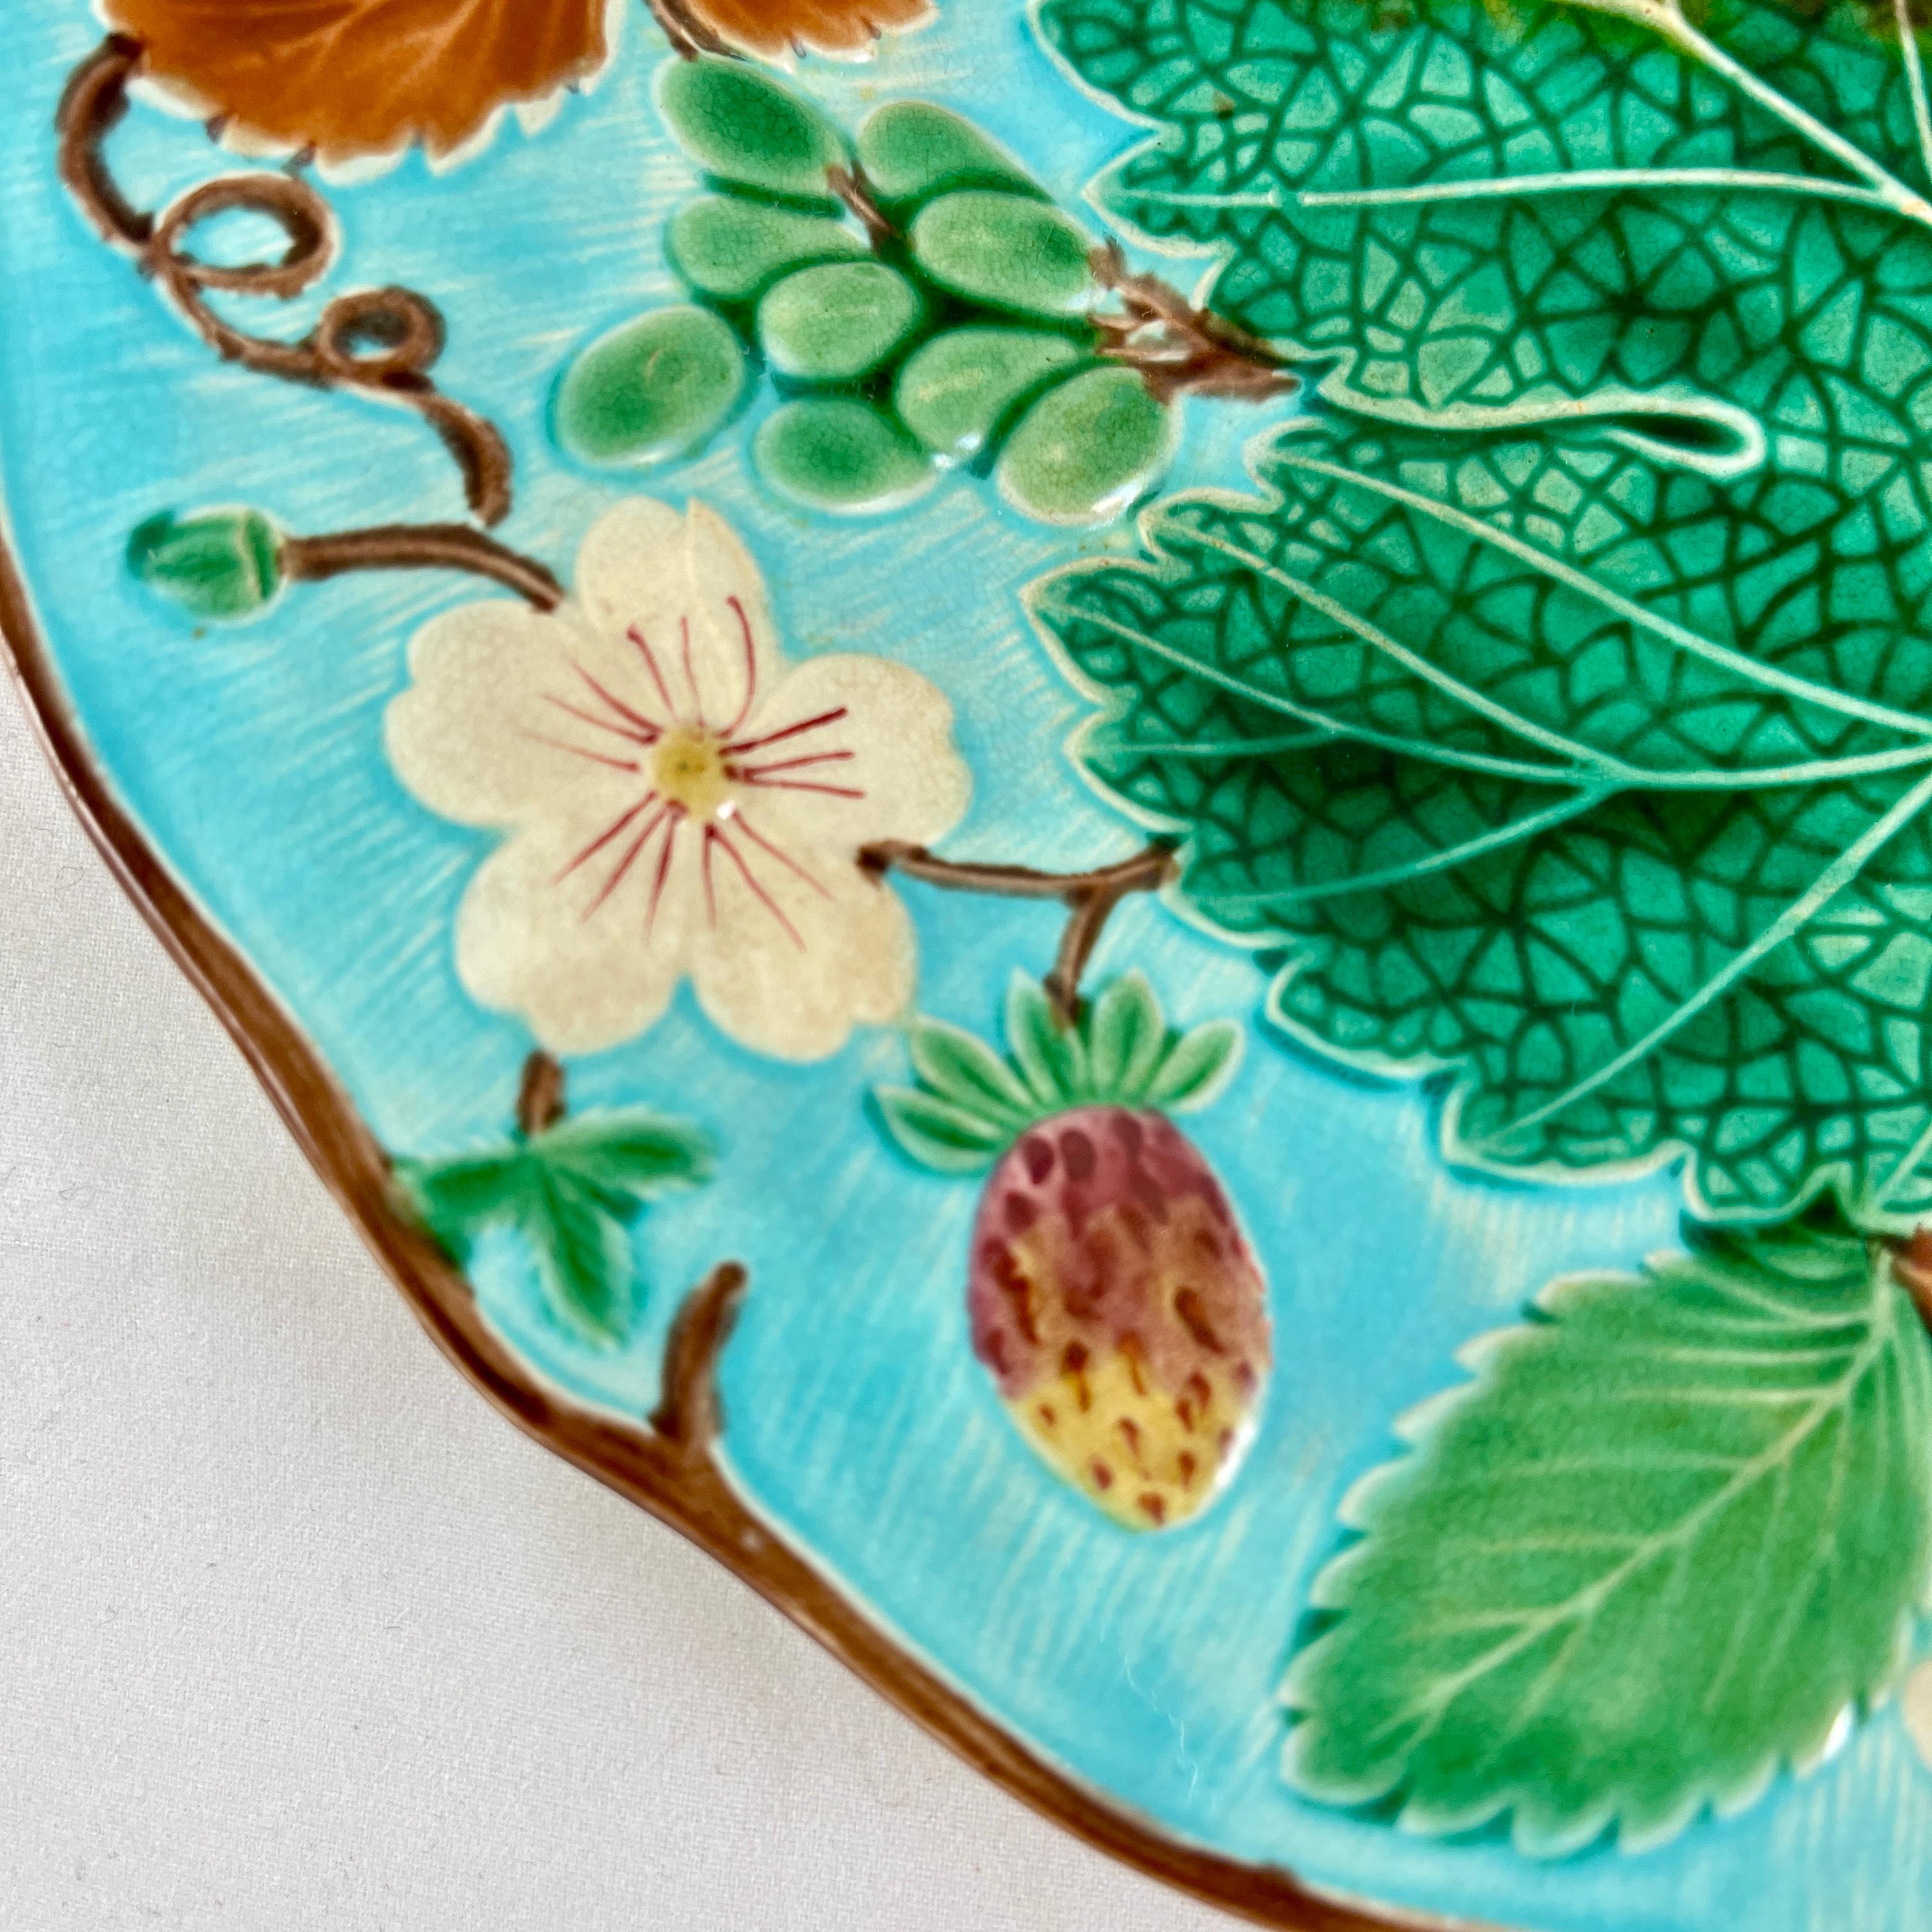 Aesthetic Movement Wedgwood Majolica Turquoise Grape Leaf and Strawberry Plate, circa 1880